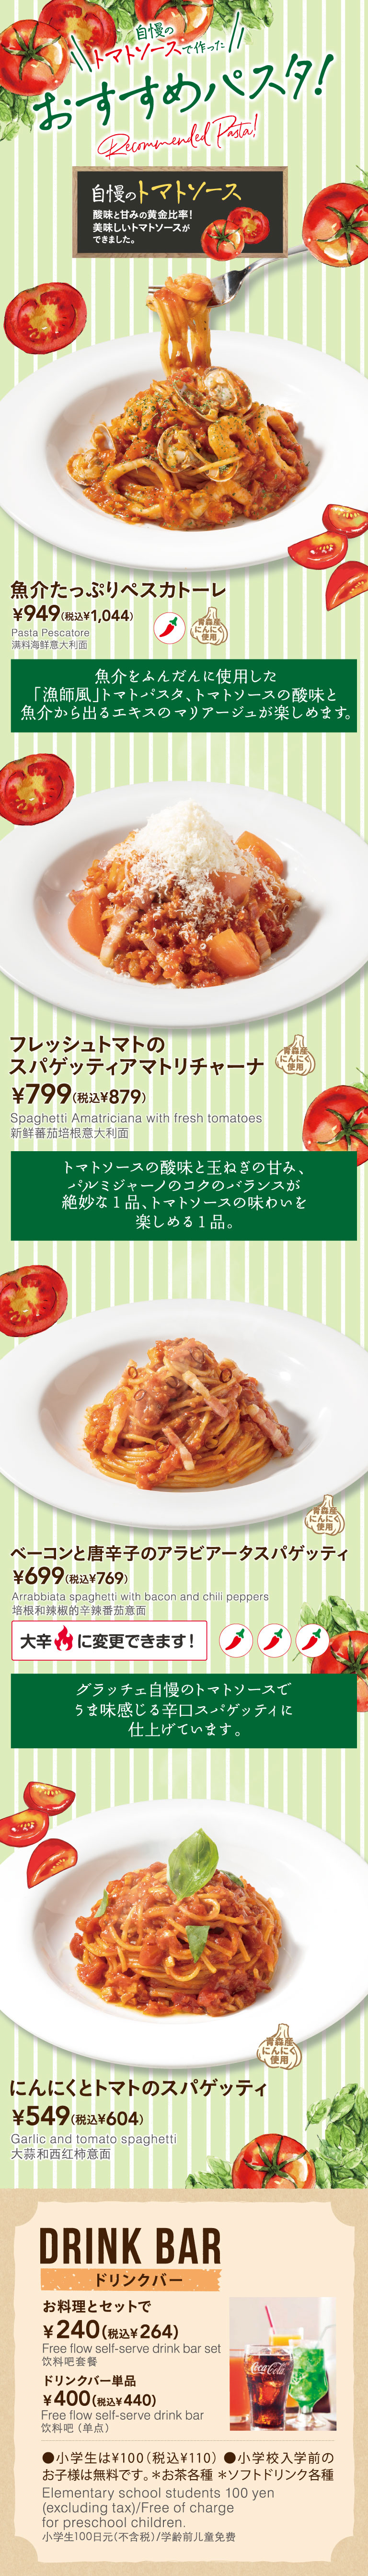 Recommended pasta made with our proud tomato sauce